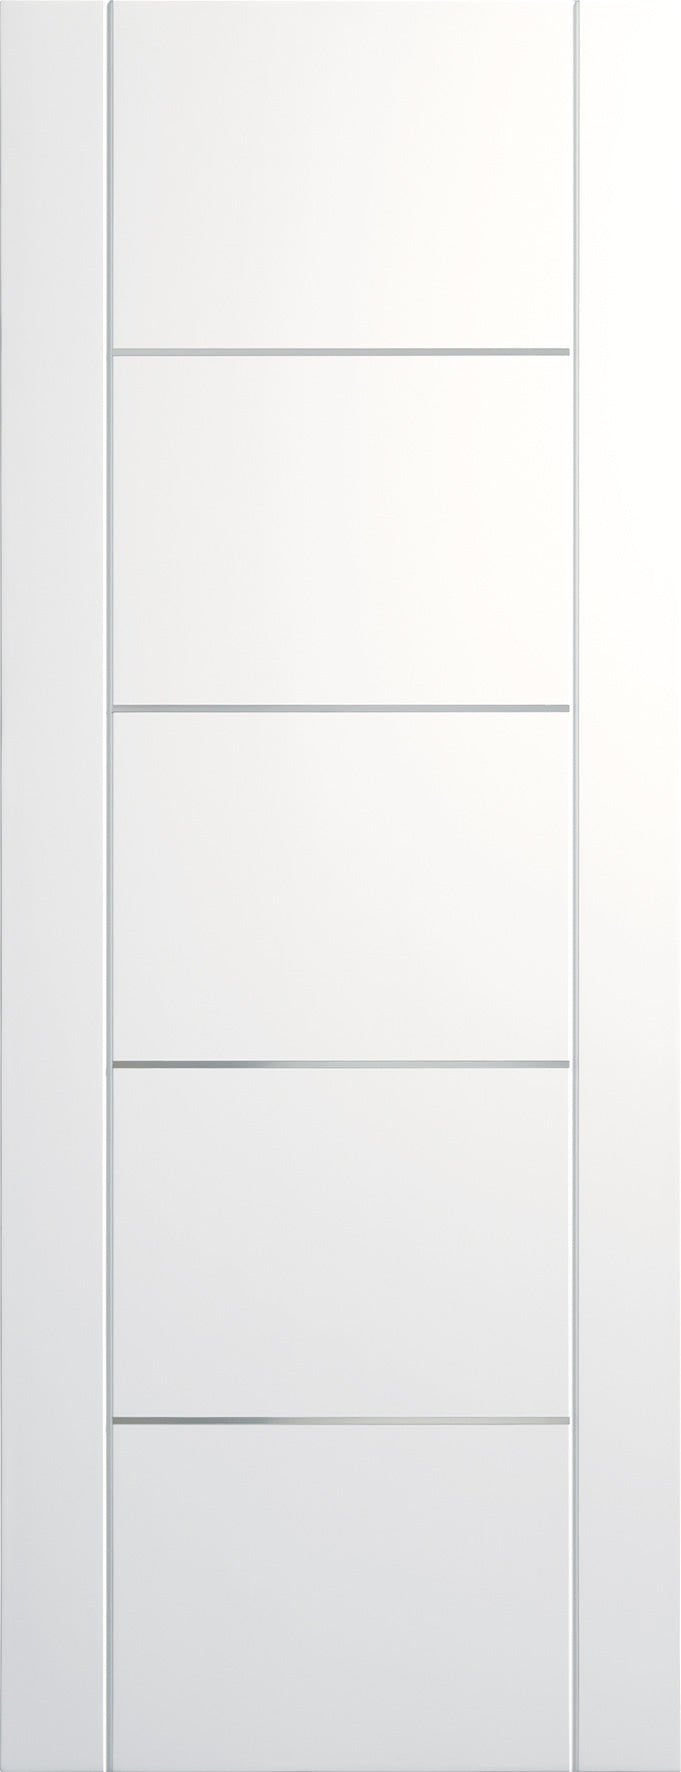 Portici white prefinished internal door with aluminium inlays.